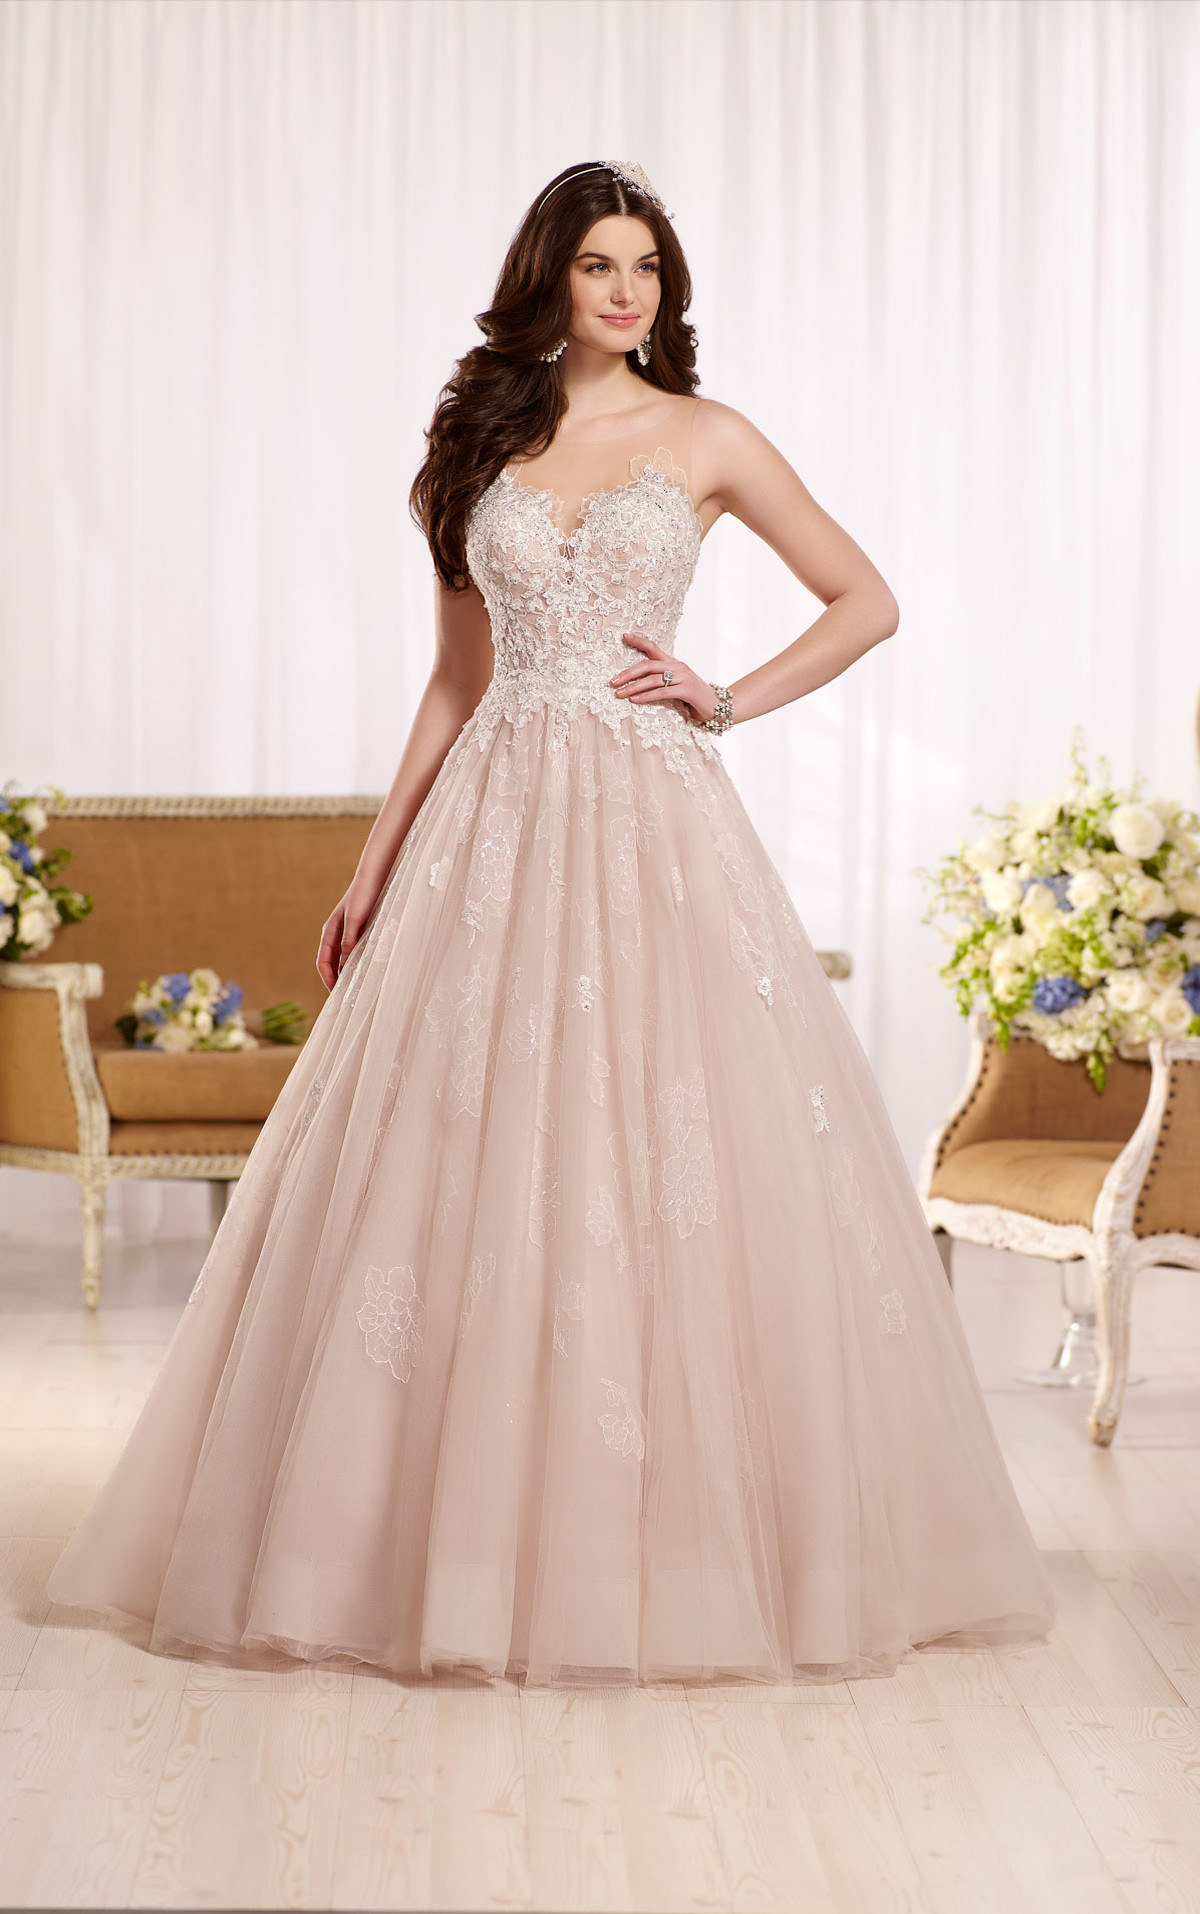 Images Of Wedding Gowns
 Ball Gown Wedding Dress with Tulle Skirt